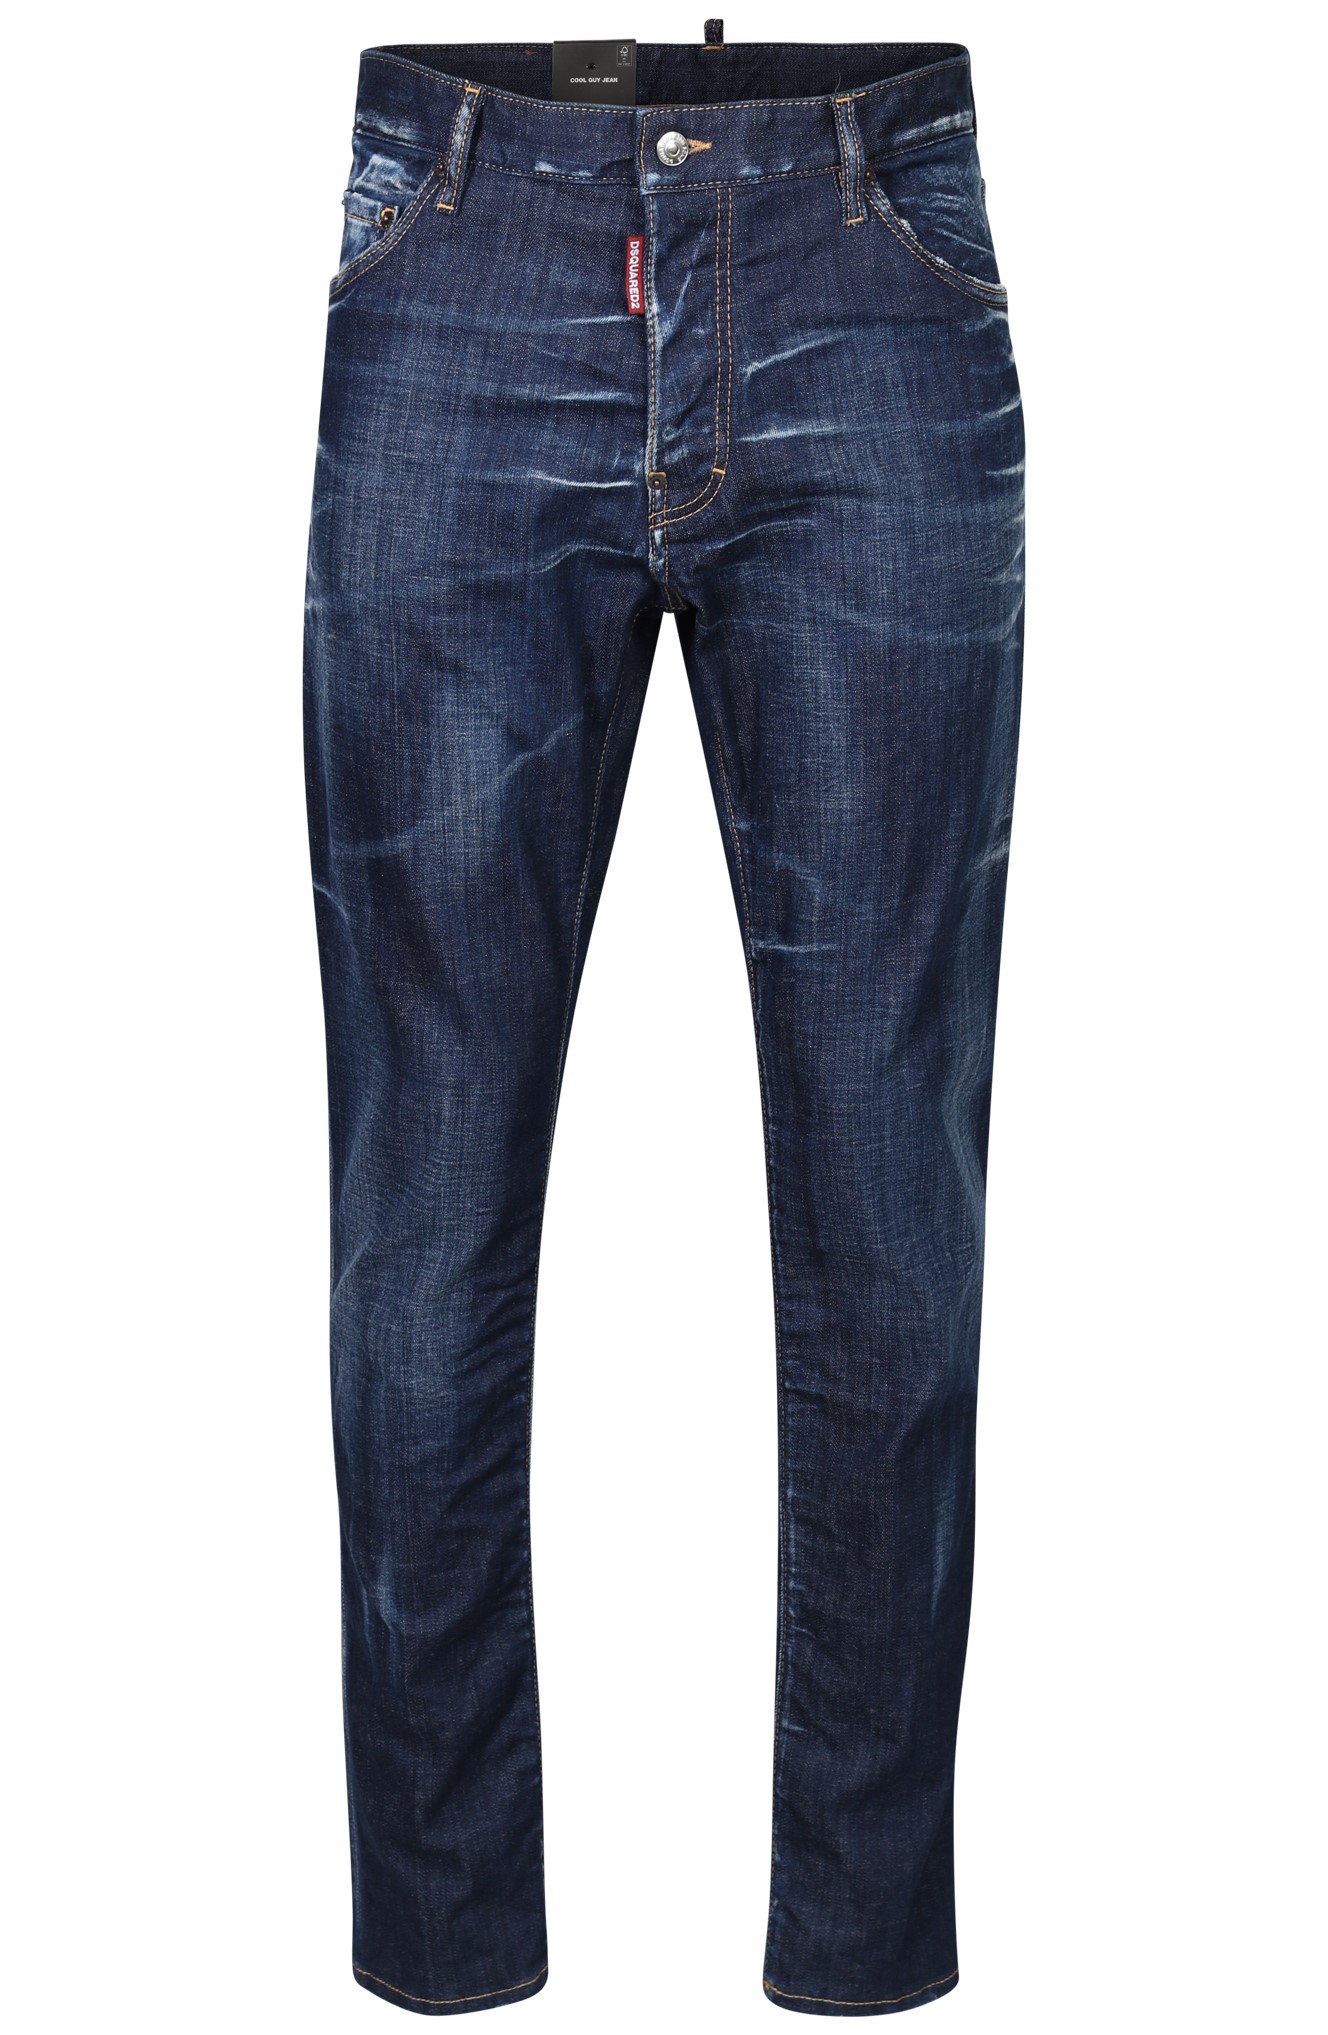 DSQUARED2 Cool Guy Jeans in Washed Dark Blue 46